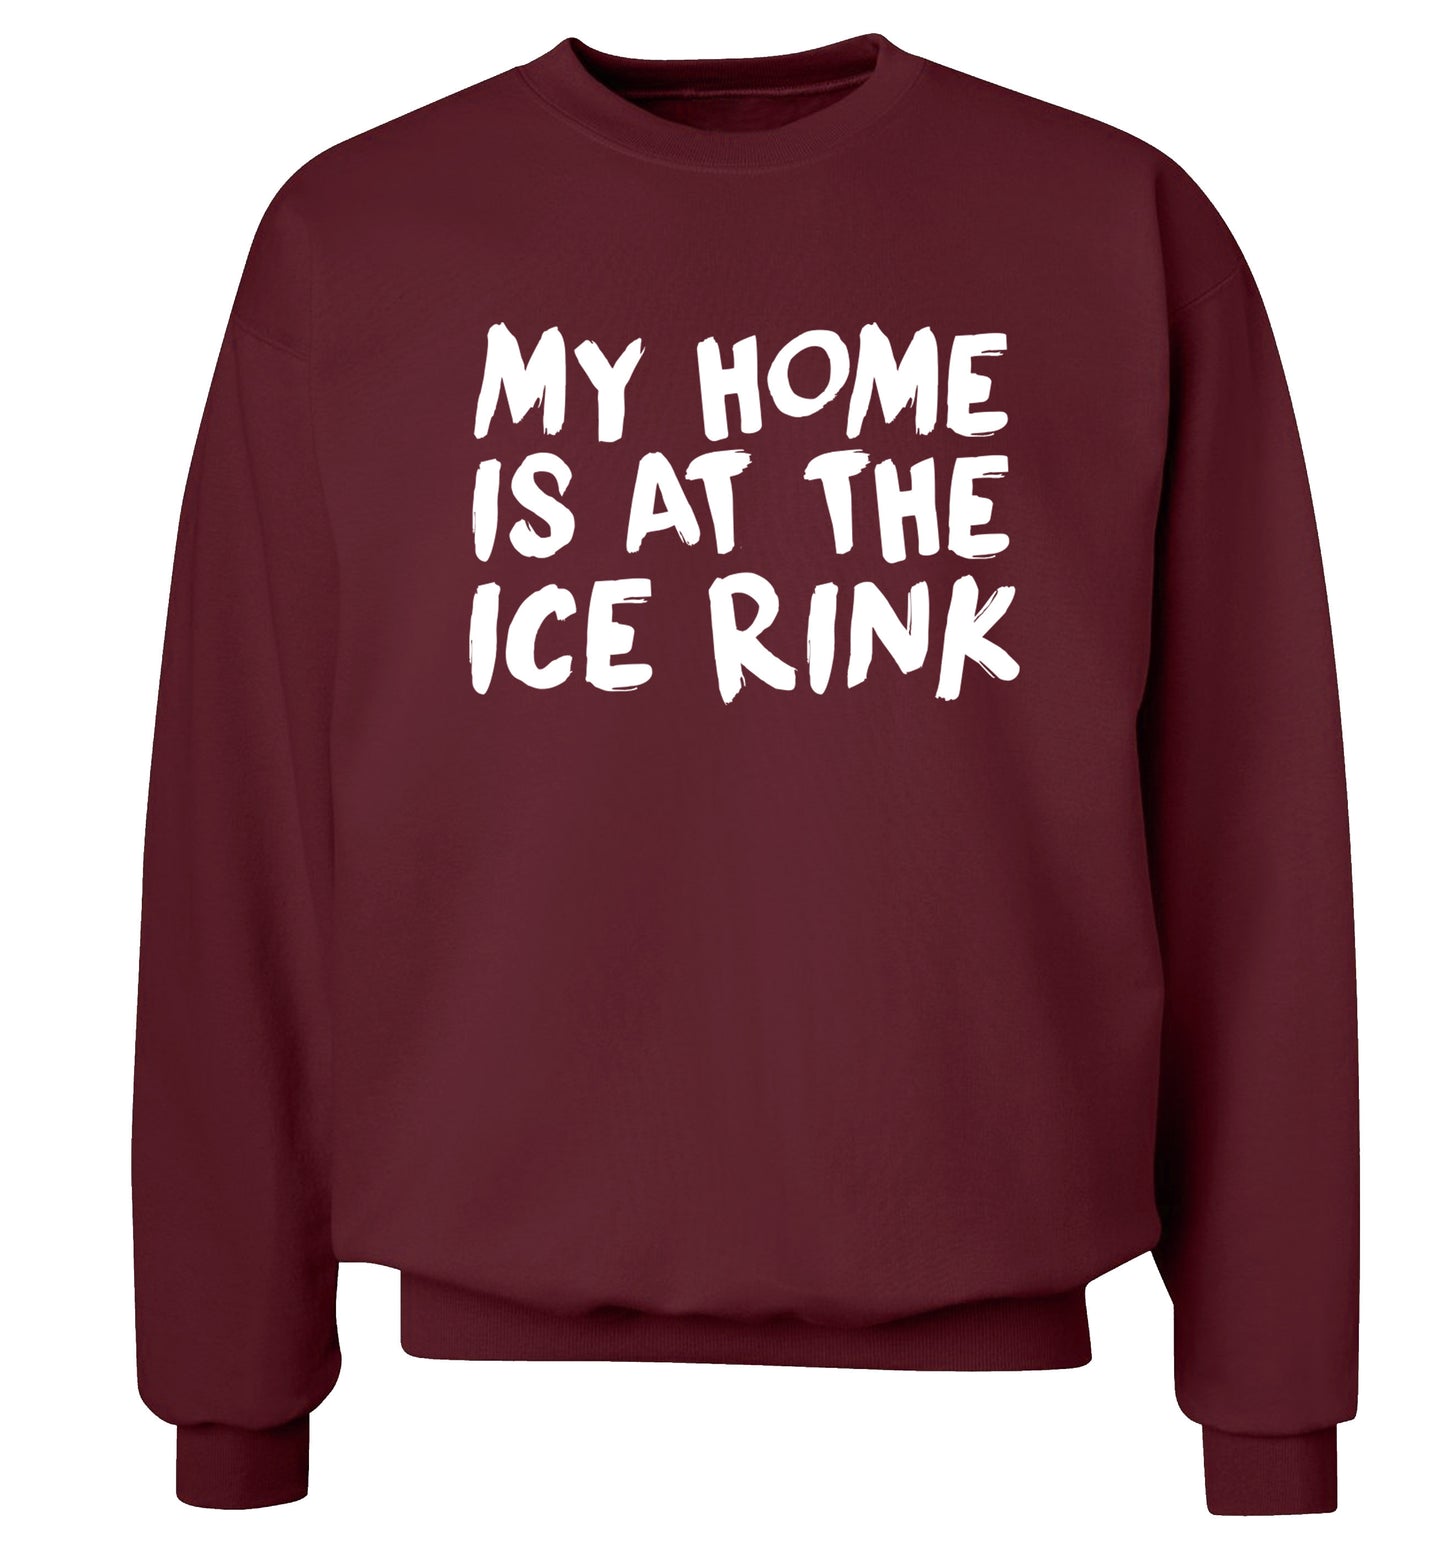 My home is at the ice rink Adult's unisex maroon Sweater 2XL